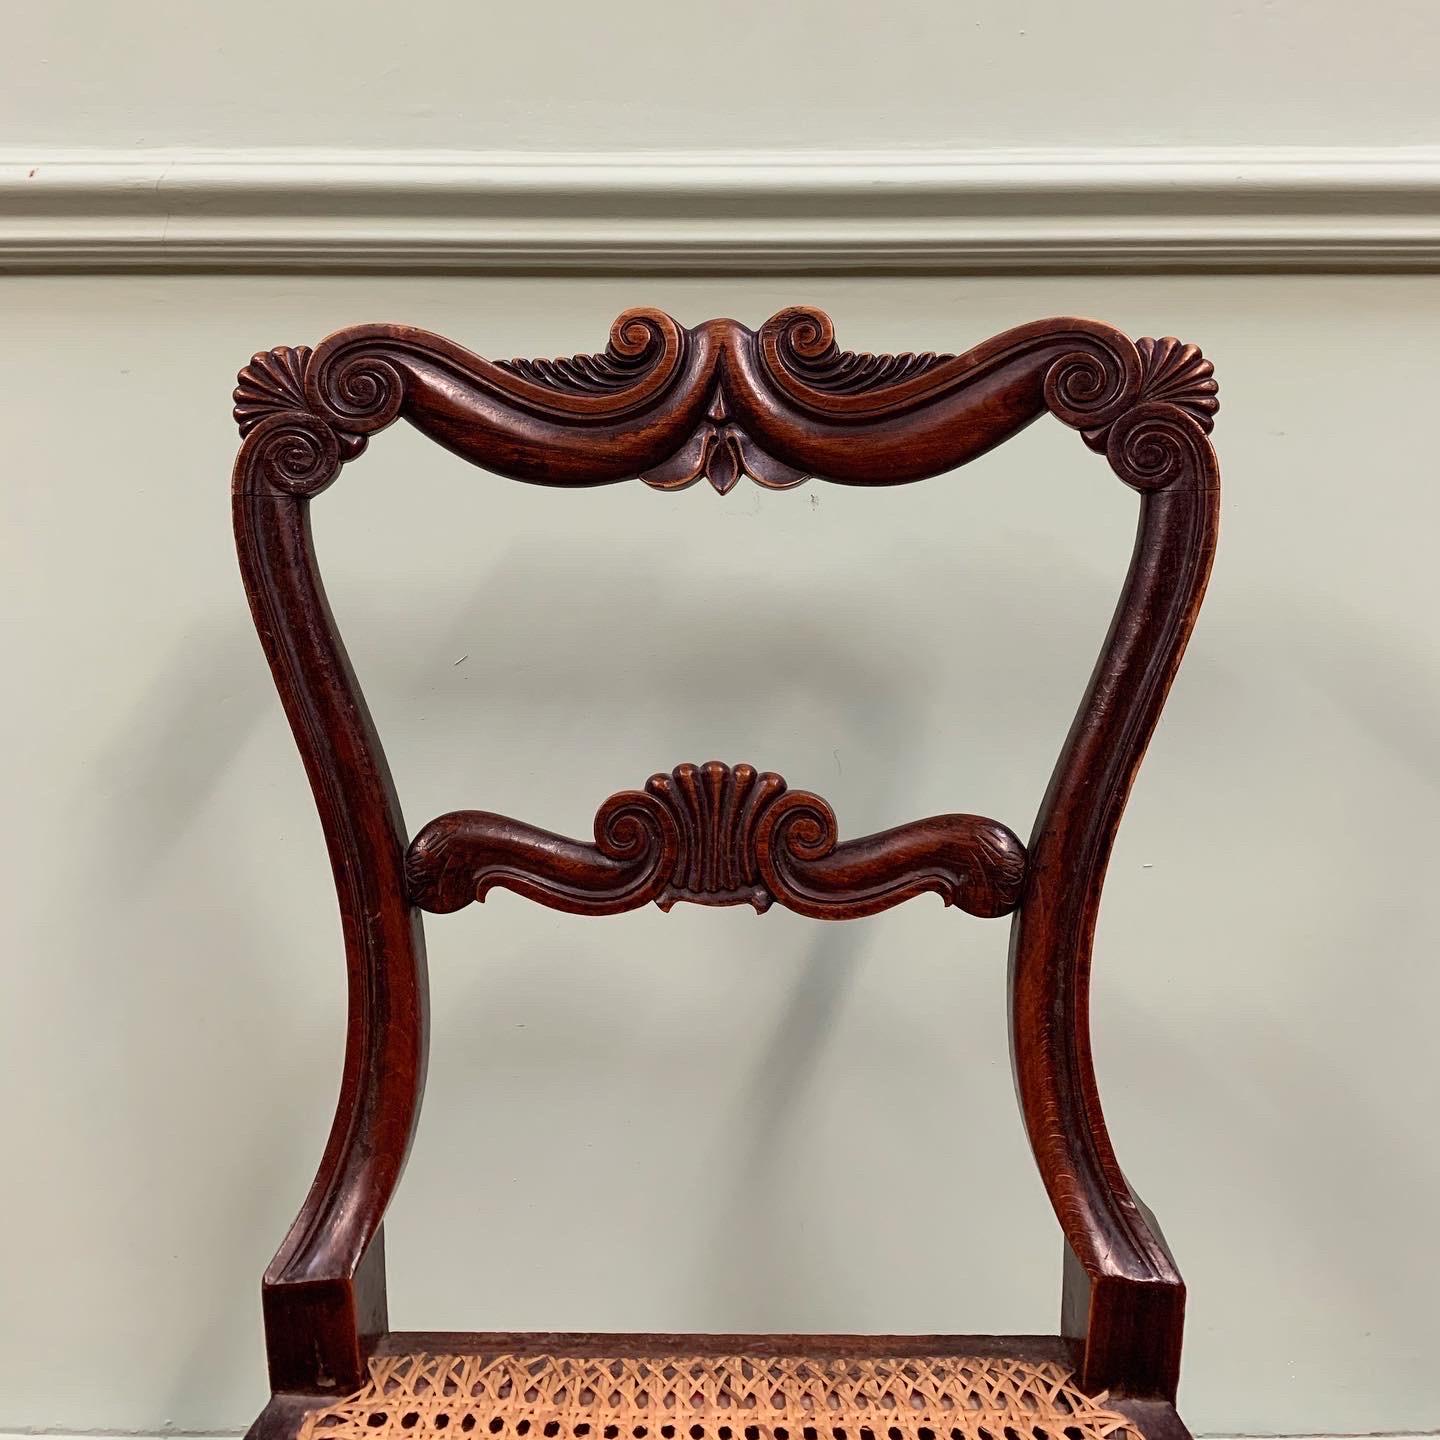 A rarely available long set of ten faux rosewood dining chairs. The chair back with its elegant top rail , having abutting scroll corners below carved scallop shells is a design seen in Gillows Lancaster Estimate Sketch Books for 1823.